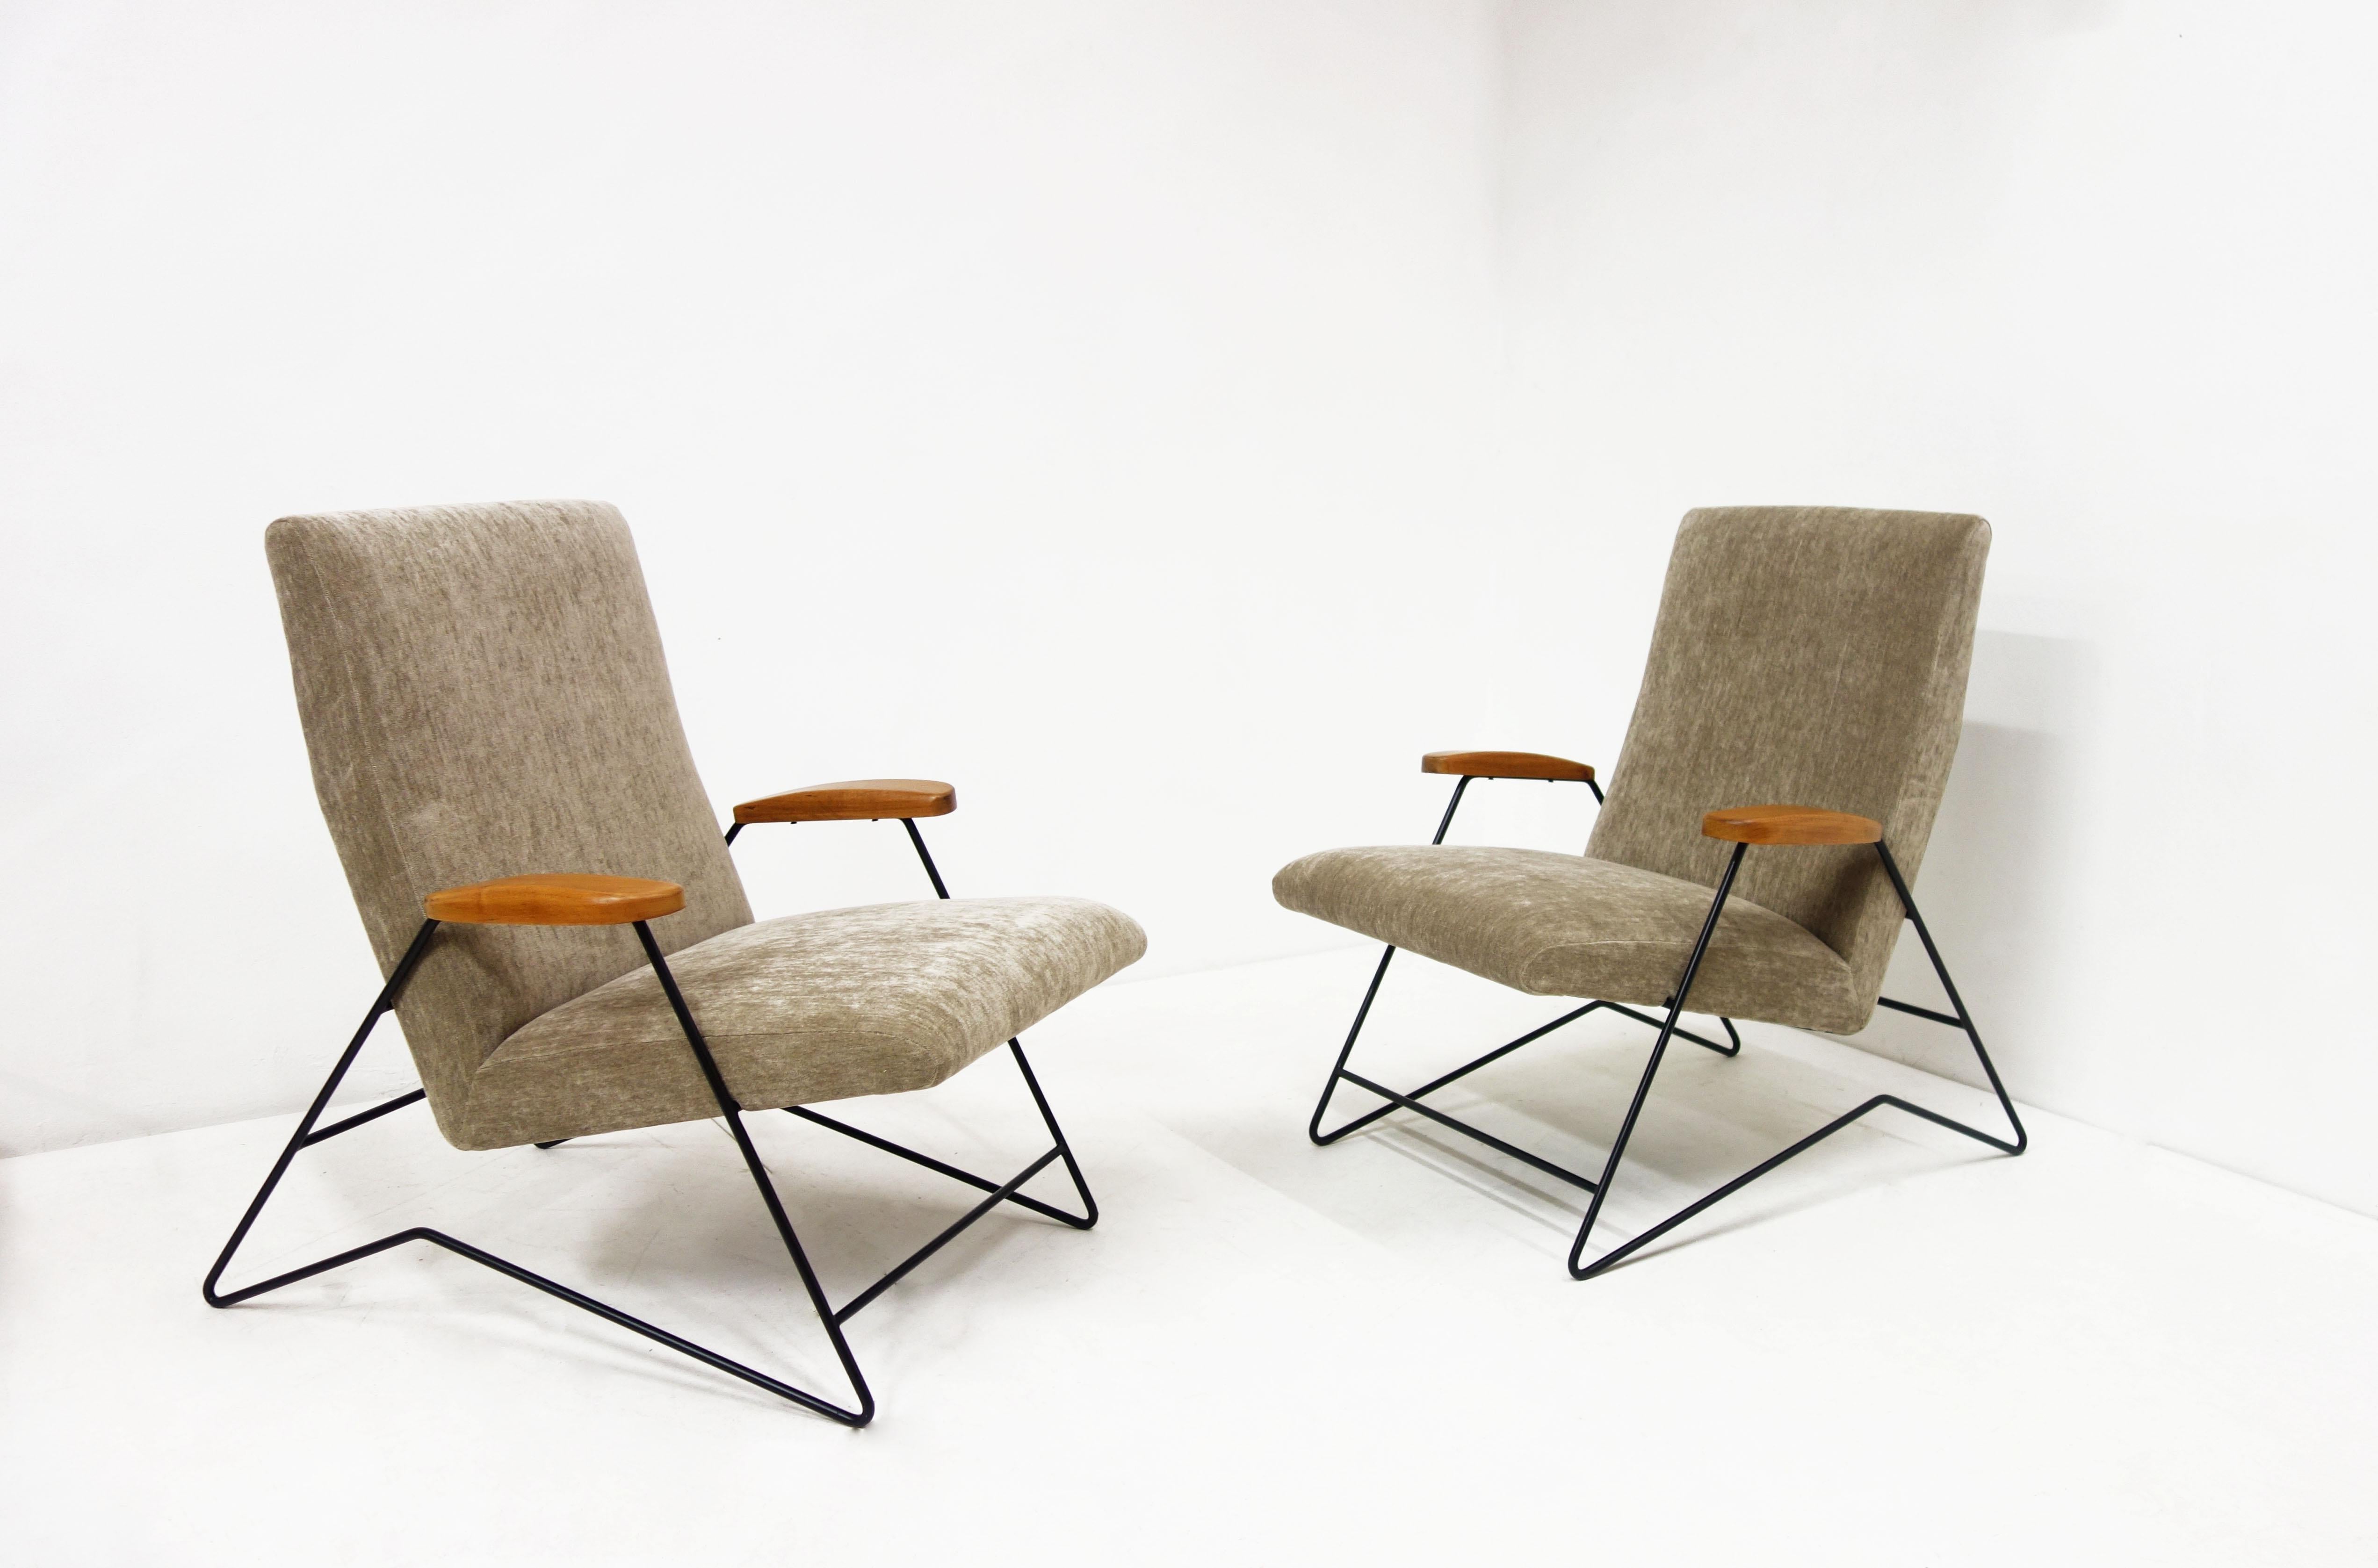 Pair of armchairs, circa 1955
Metal structure, wood, fabric from Dedar Milano.
This pair of armchairs is characteristic of Carlo Hauner and Martin Eisler’s works. They excelled in the conception of pure lines thanks to the use of the tubular